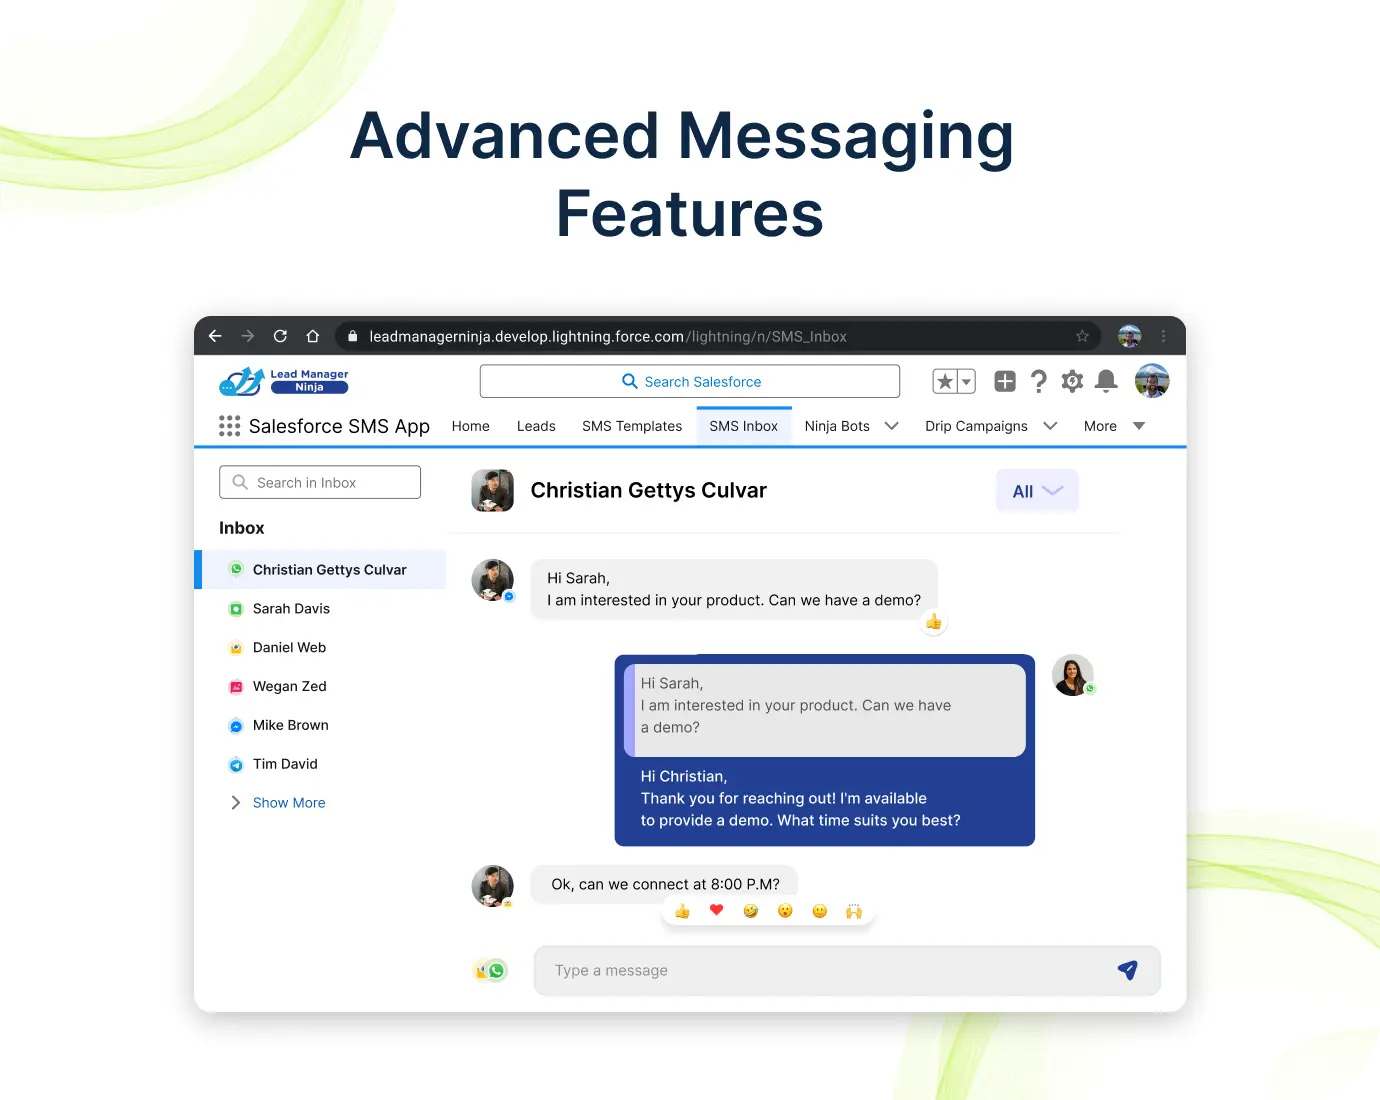 Advanced Messaging Features